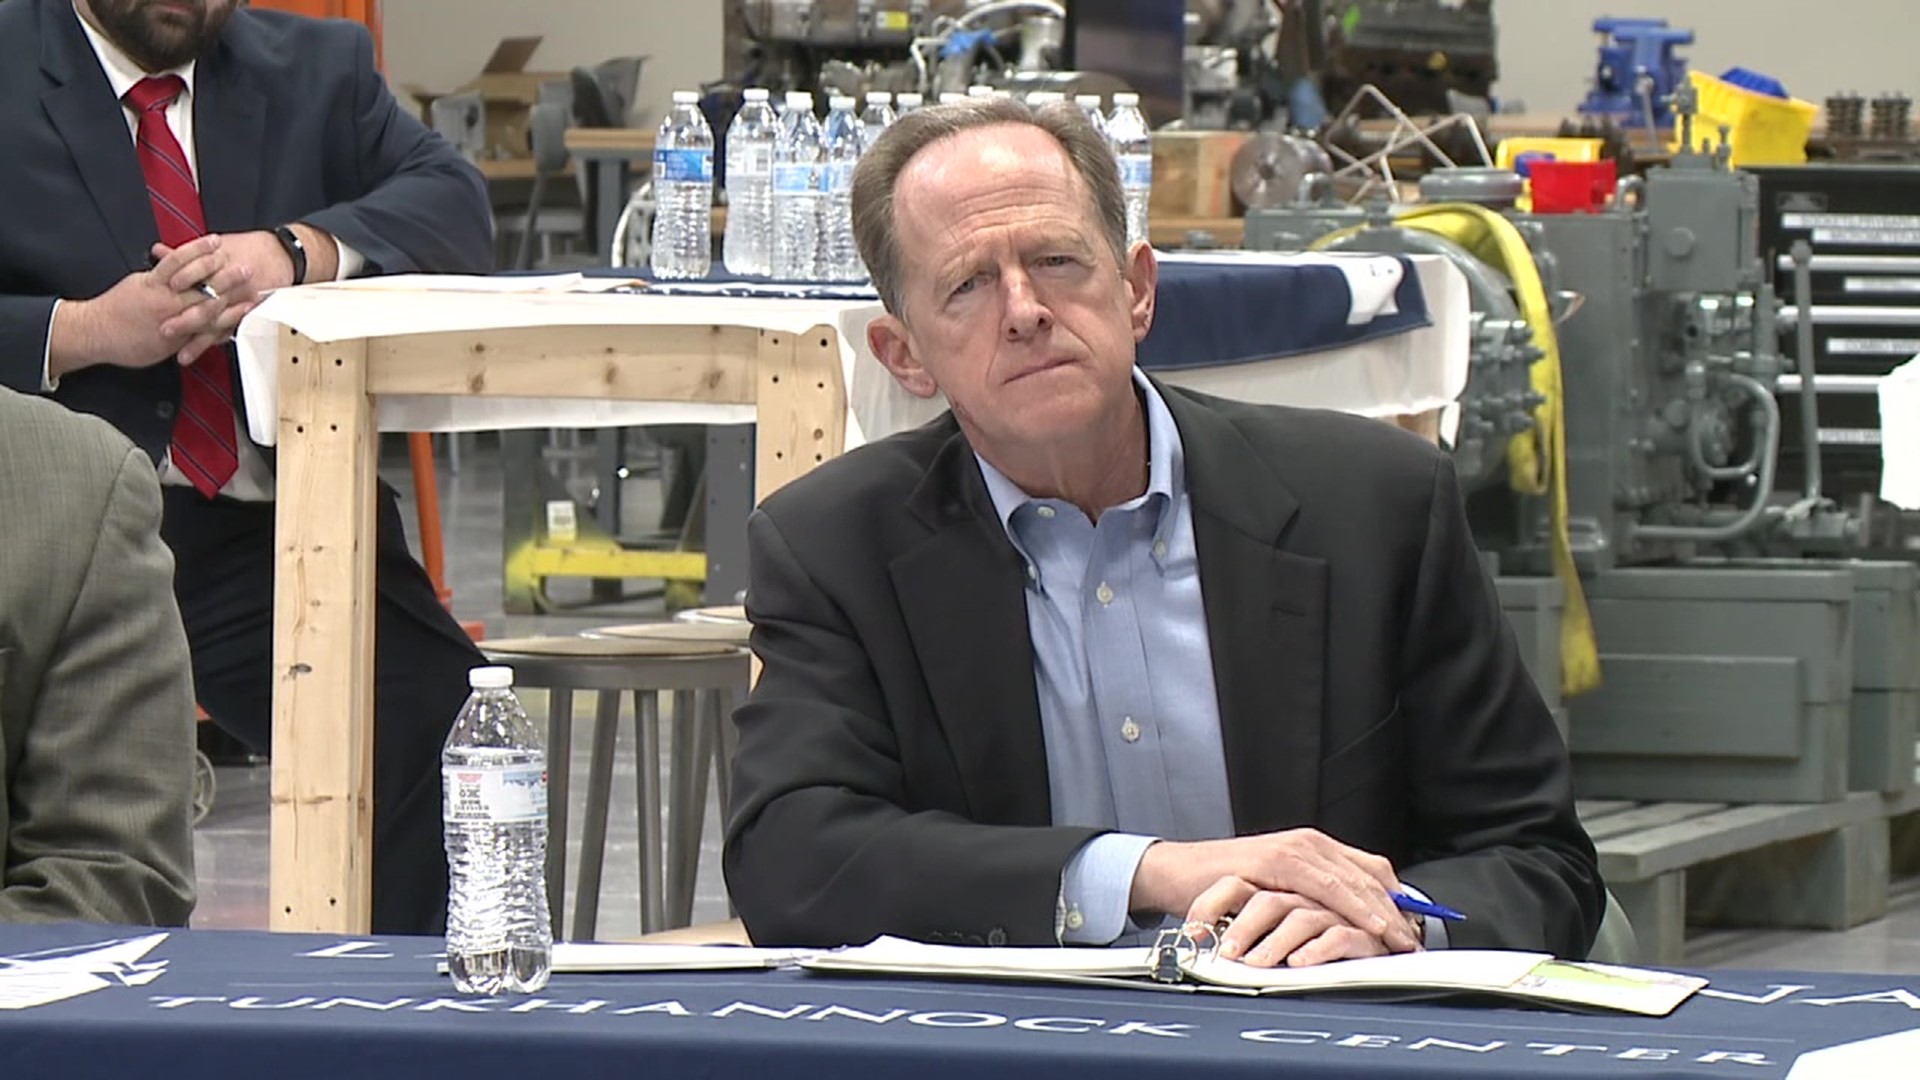 Newswatch 16 caught up with Pennsylvania's U.S. Sen. Pat Toomey on a visit to a Lackawanna College campus in Wyoming County.